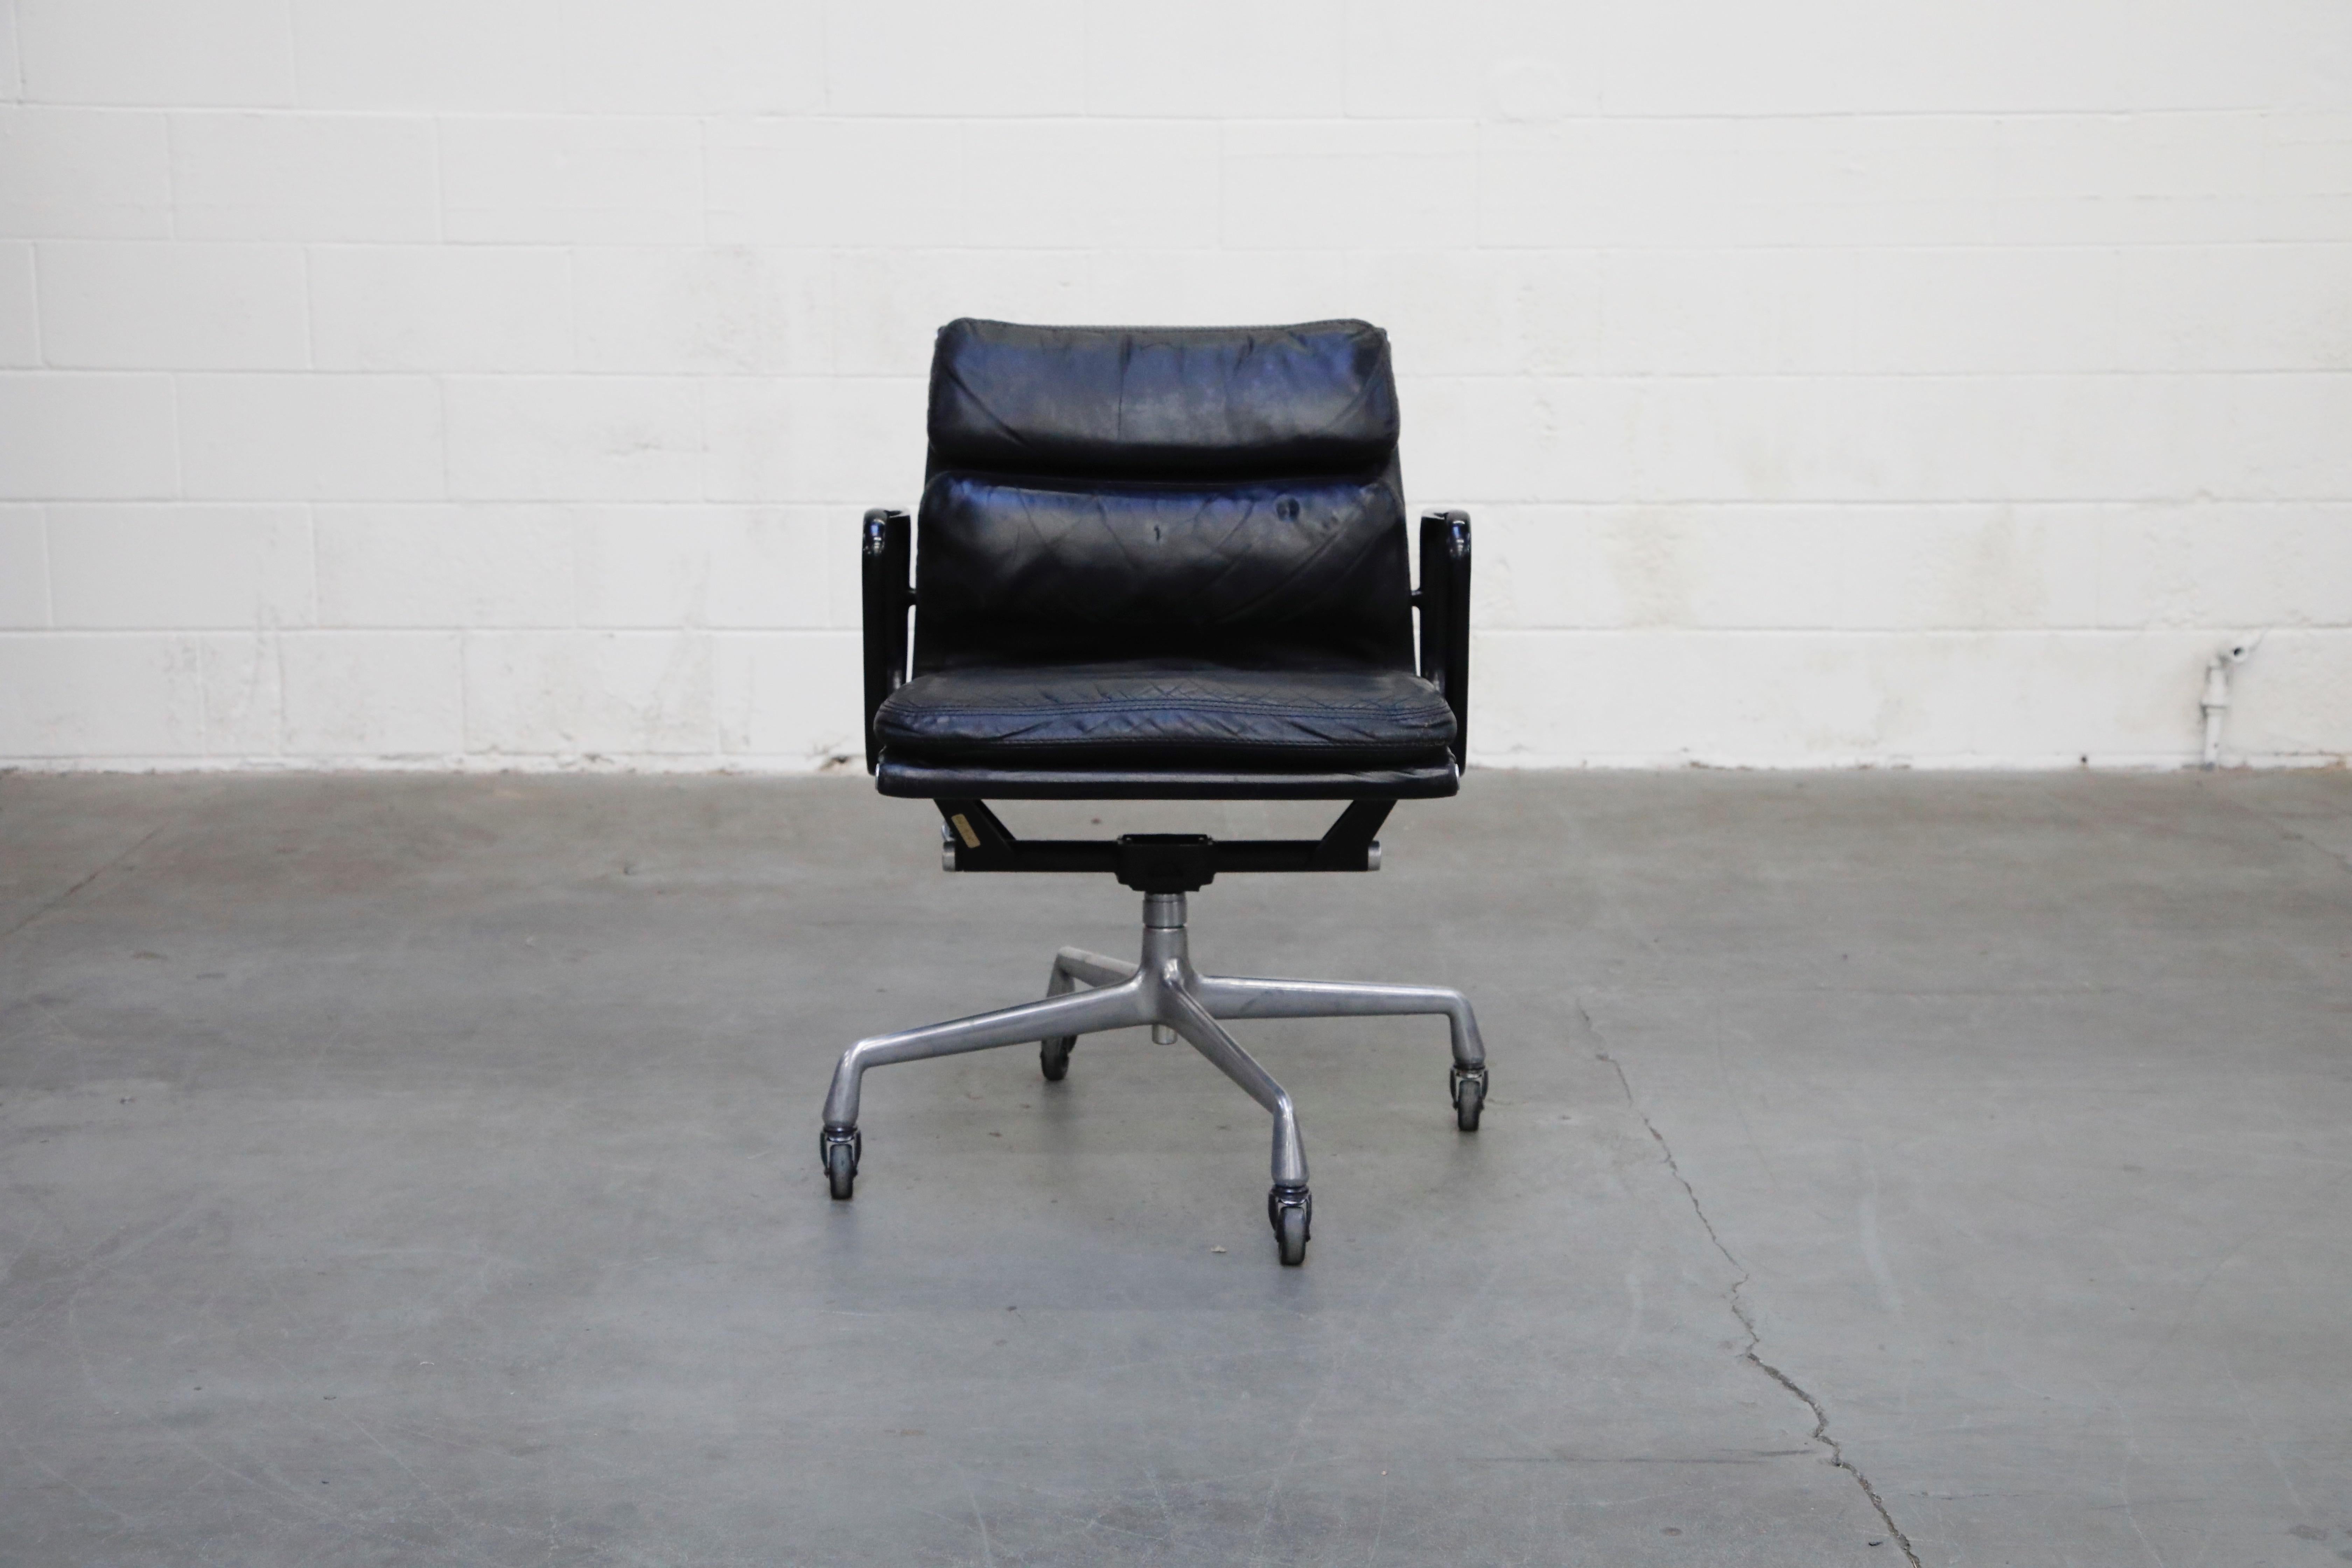 A rare early production year signed and dated collectors example of a rare colorway, black leather on black frame with aluminum base 'Soft Pad' Management Chair, dated February 3, 1976 - the same great year that brought us 'Rocky', 'King Kong', and